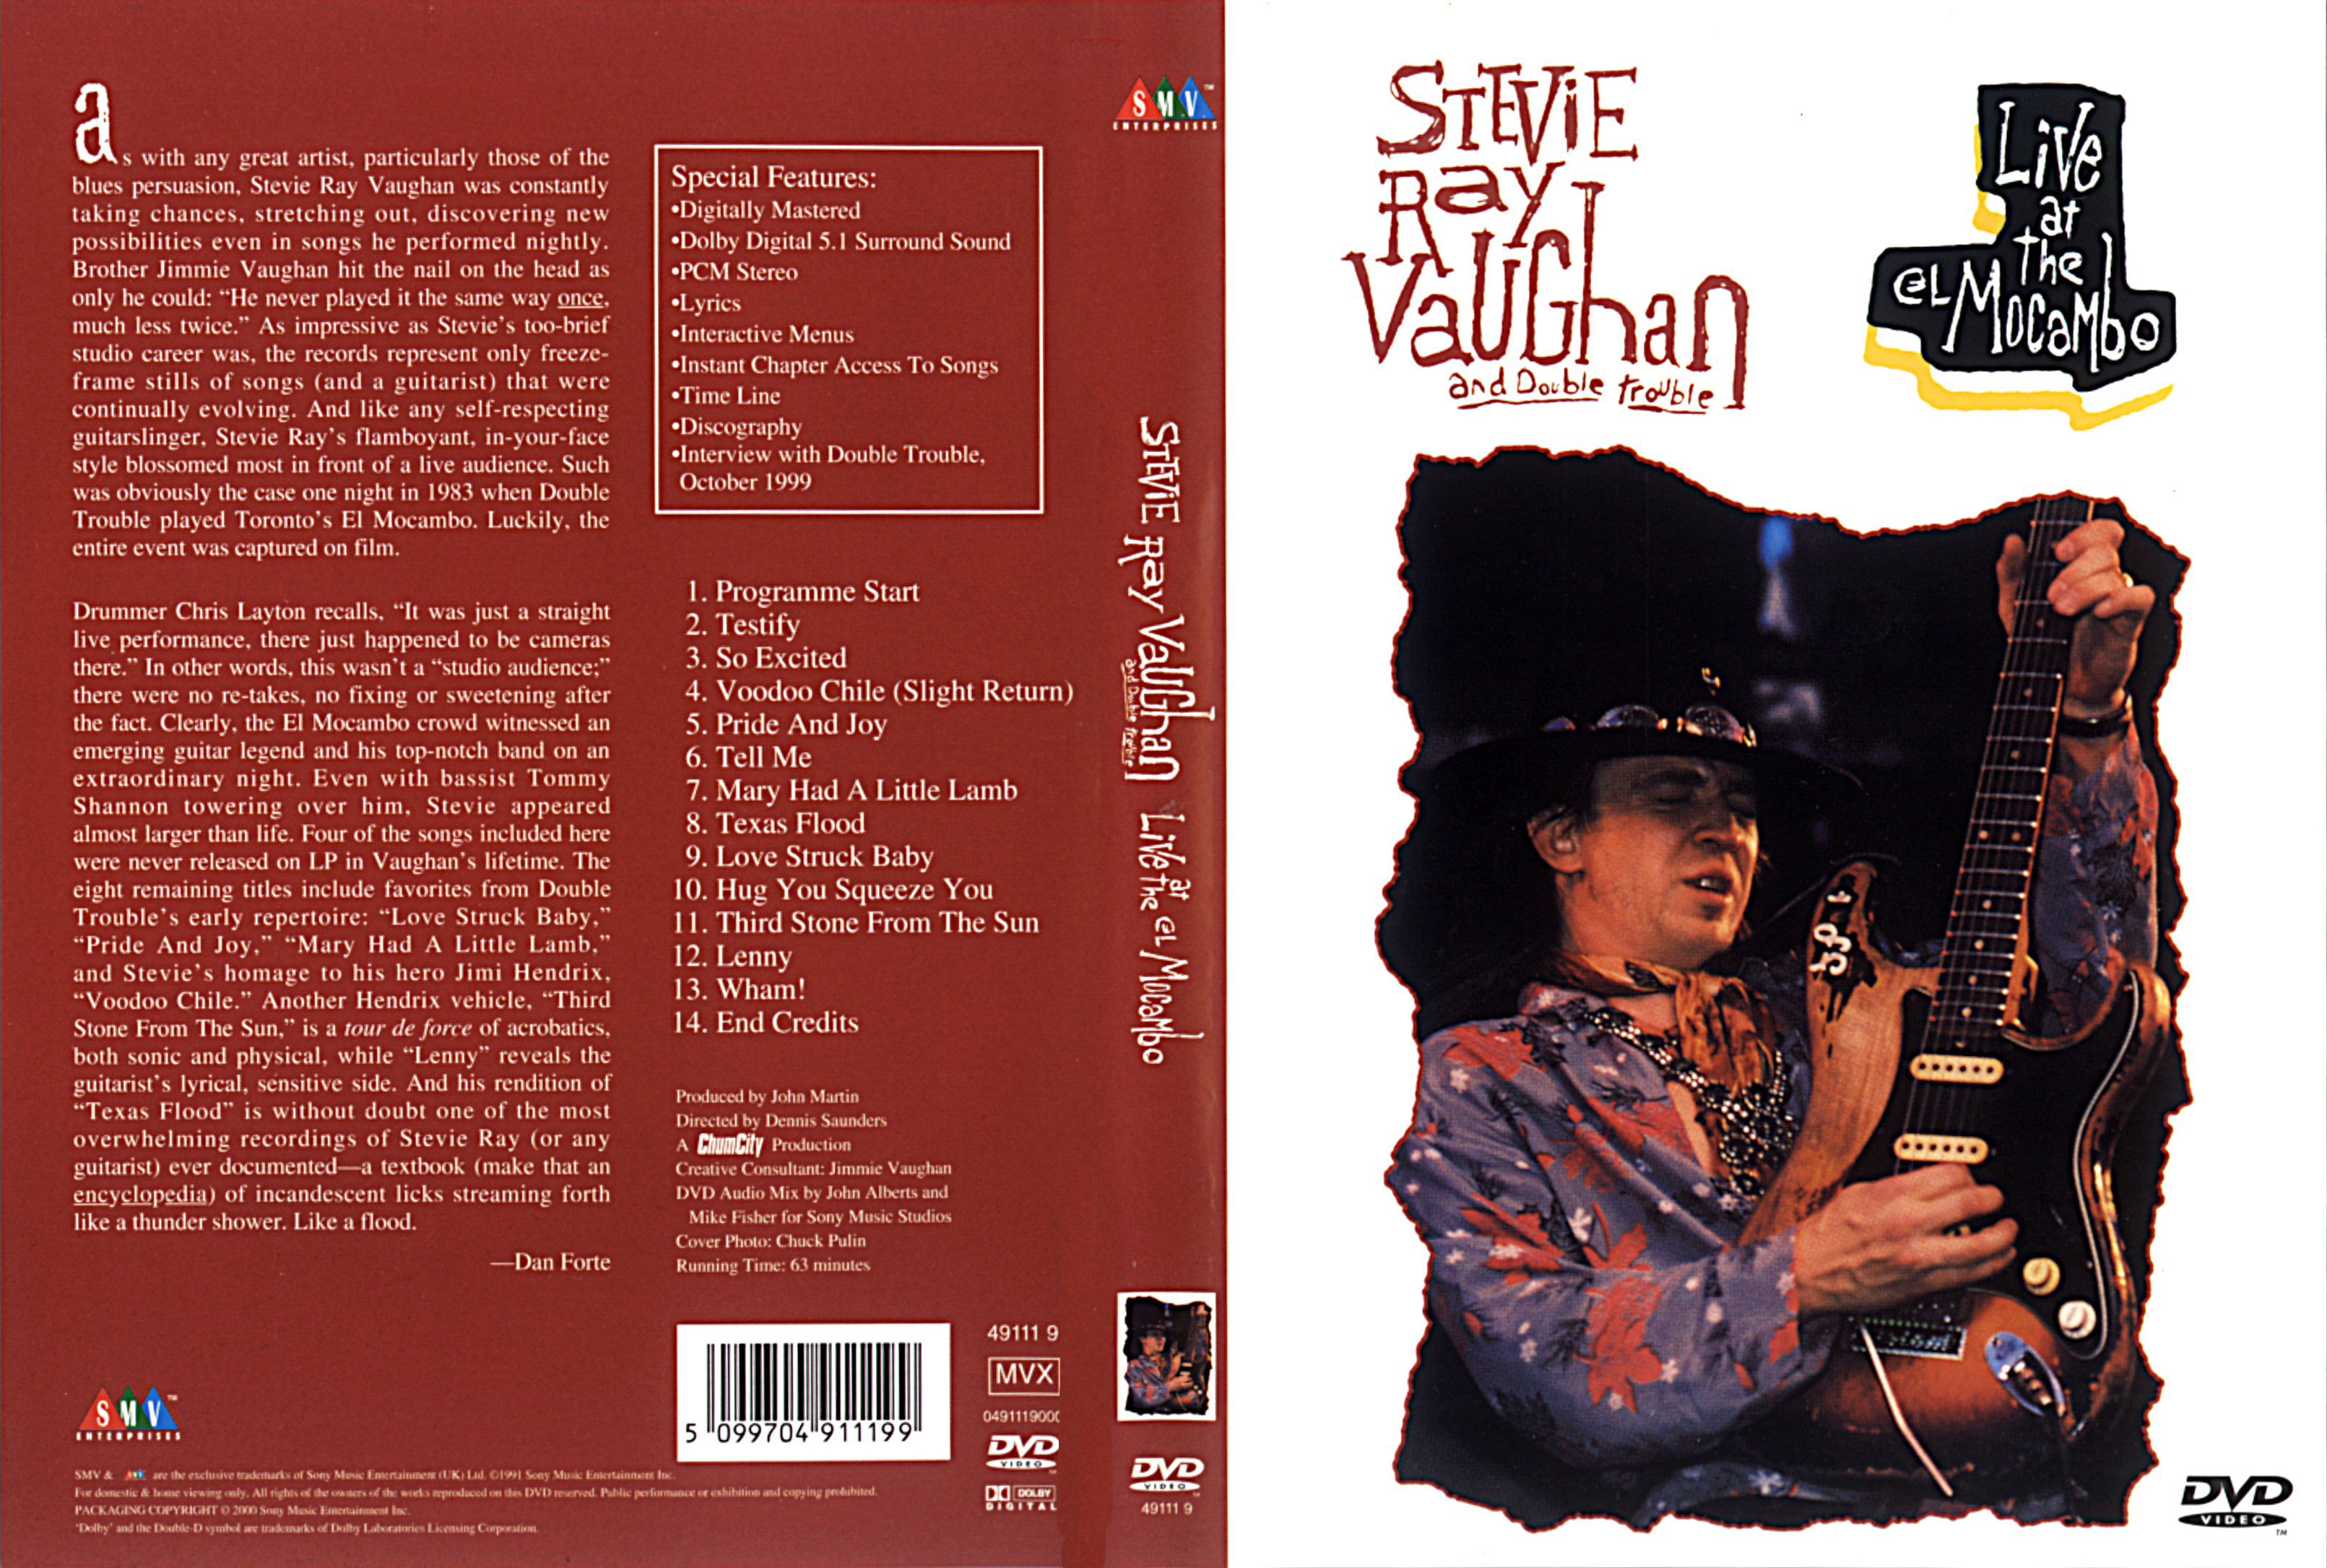 Jaquette DVD Stevie Ray Vaughan and double trouble - Live at the El Mocambo